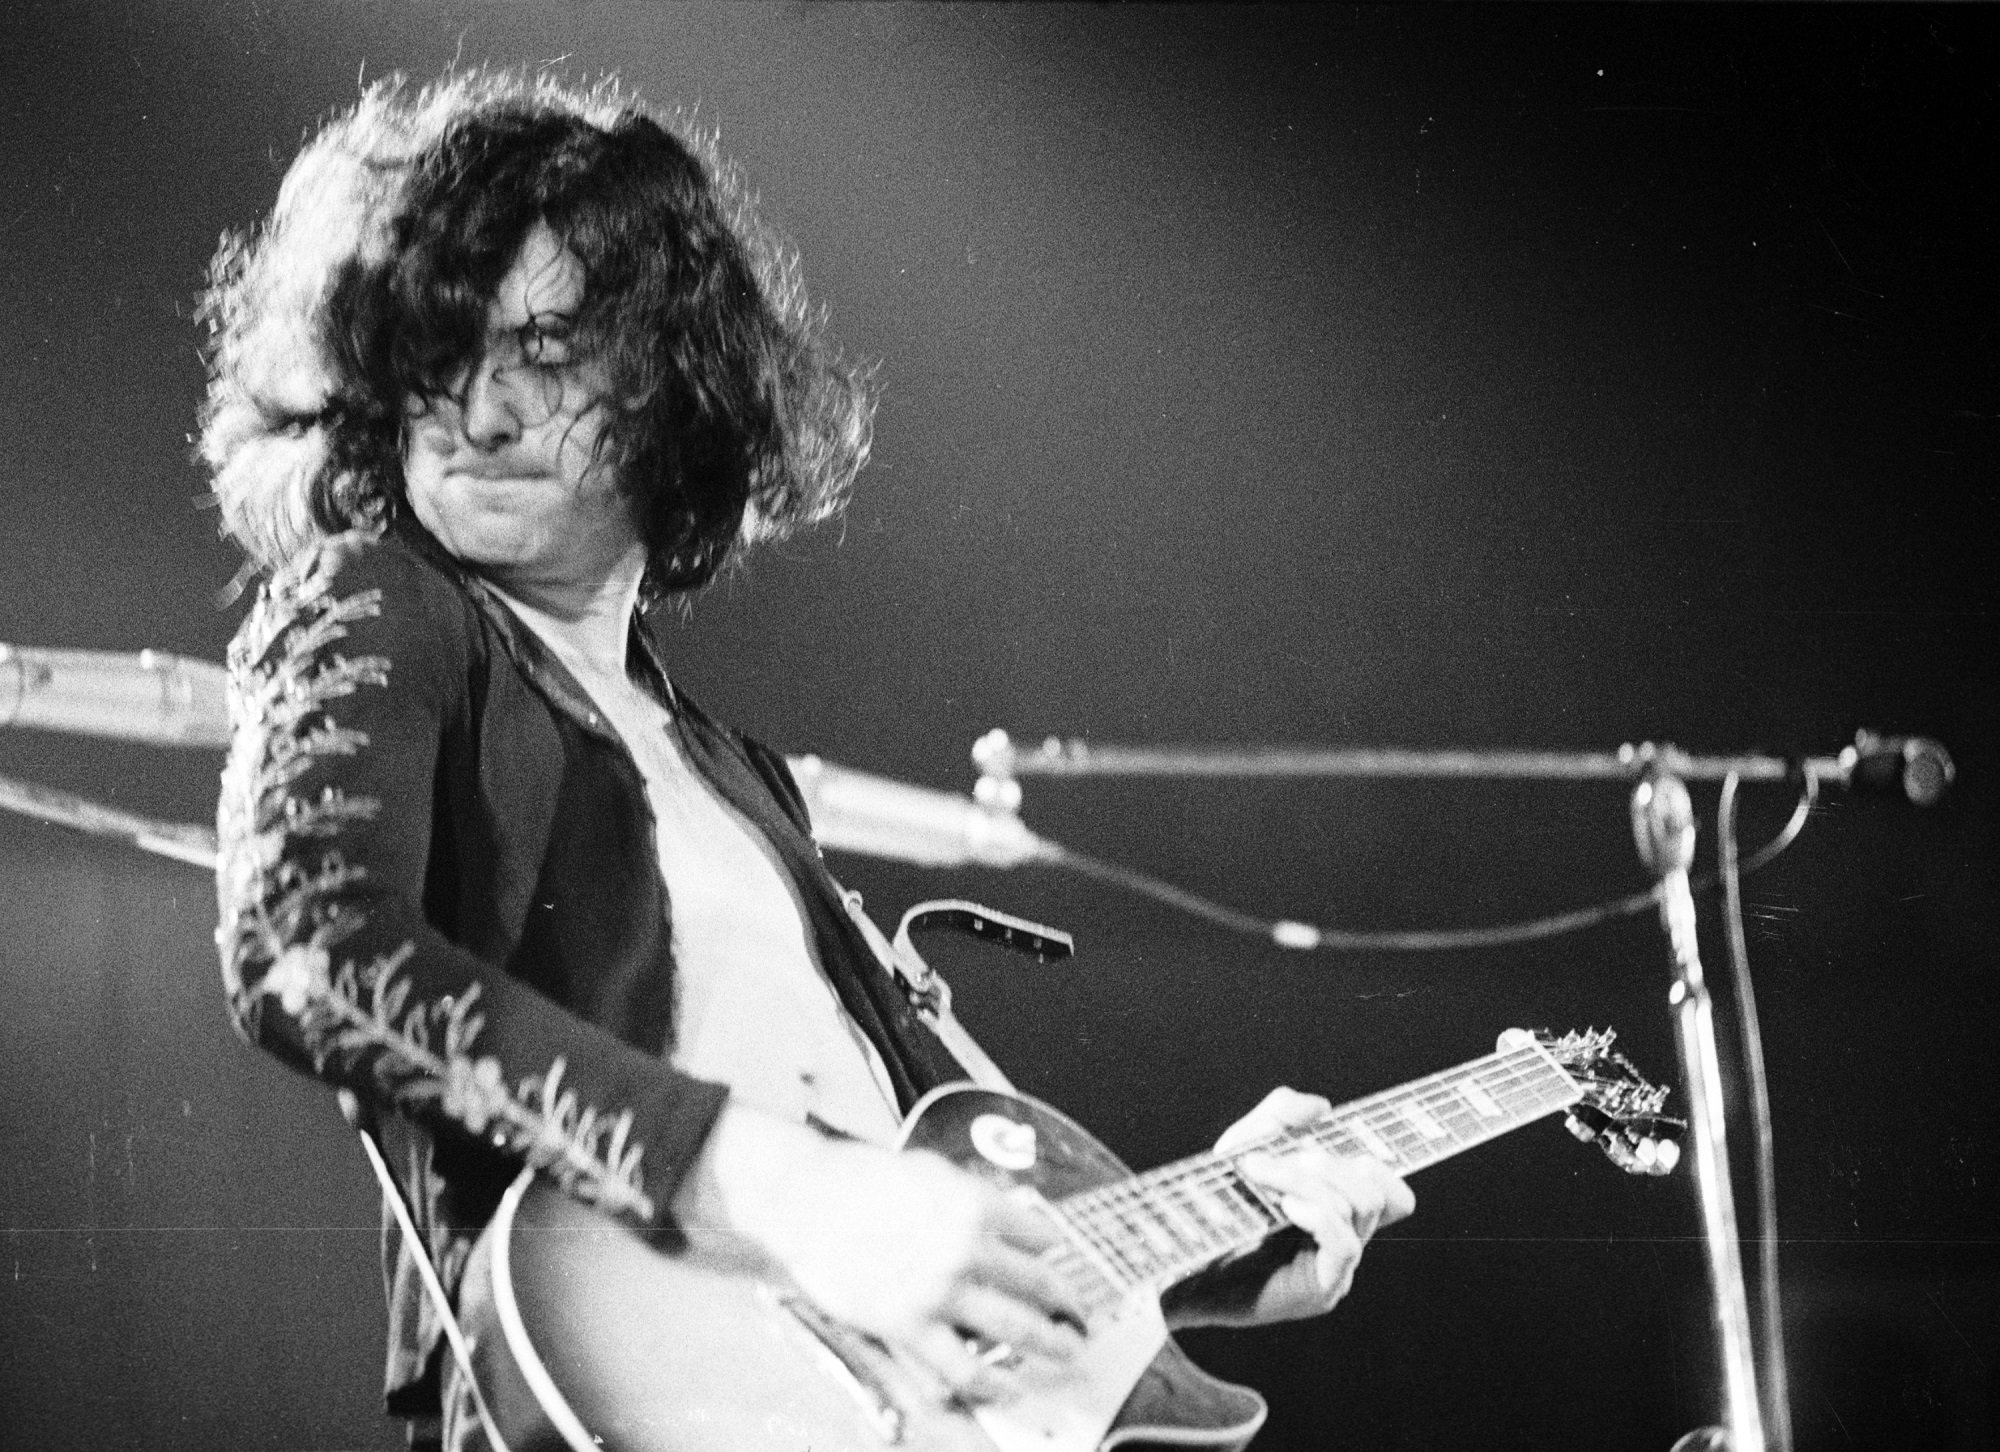 A black and white photo of Jimmy Page playing the guitar